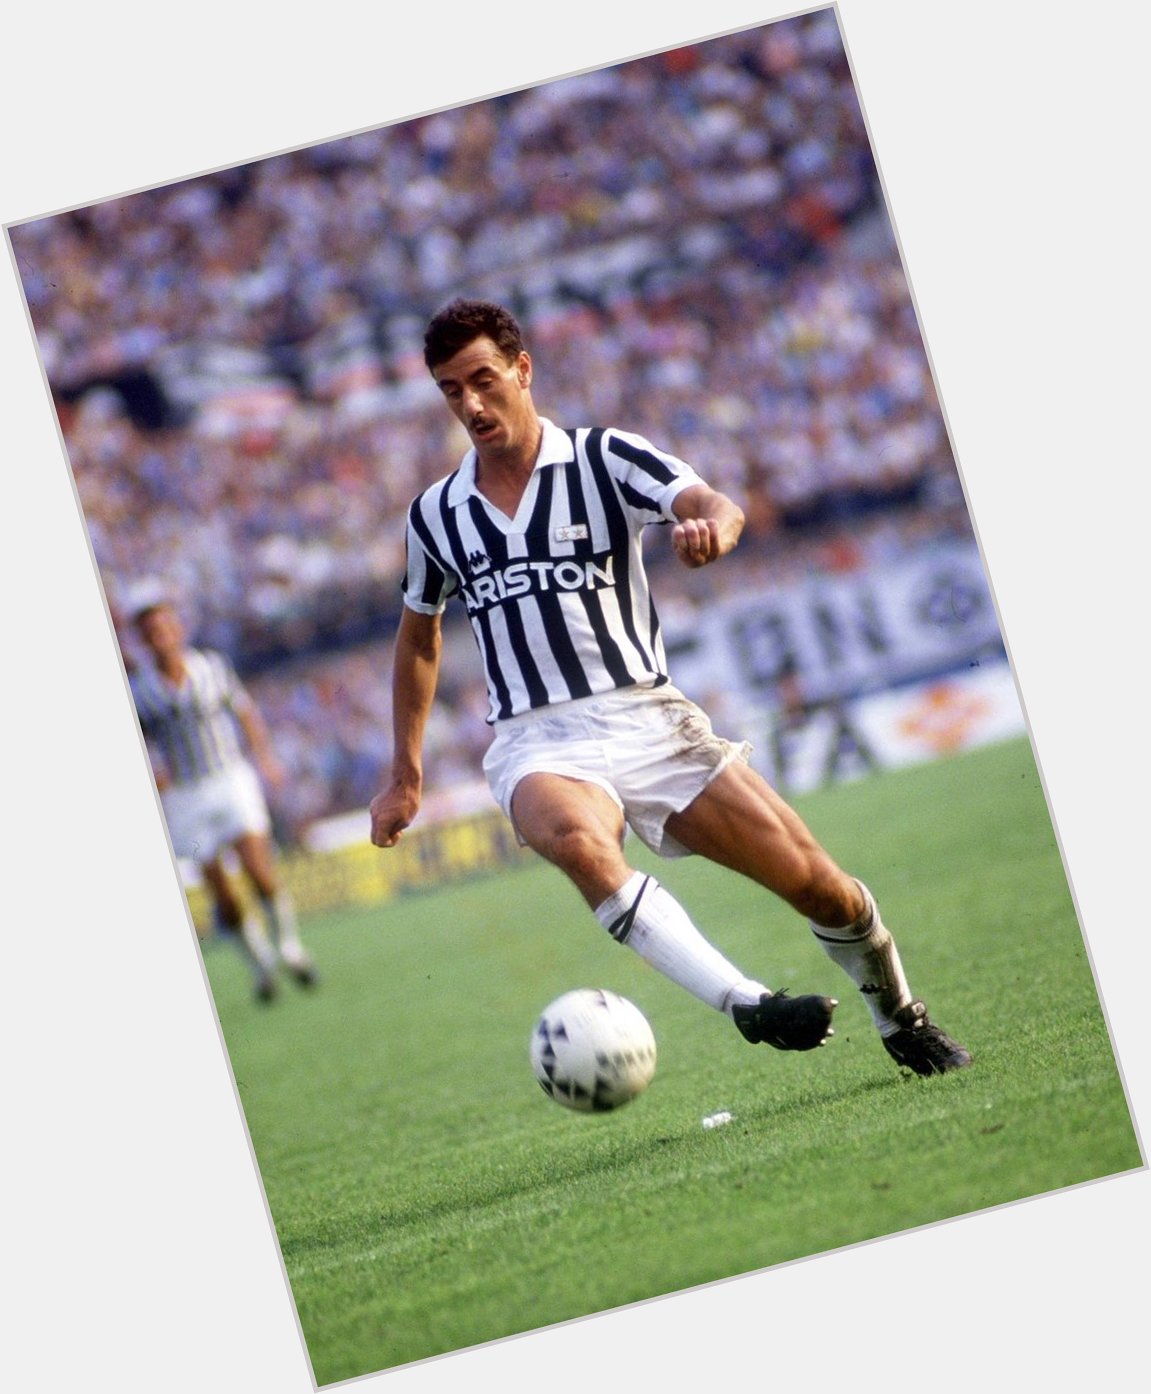 Happy birthday to former Juventus striker Ian Rush, who turns 56 today.

Games: 40
Goals: 13 